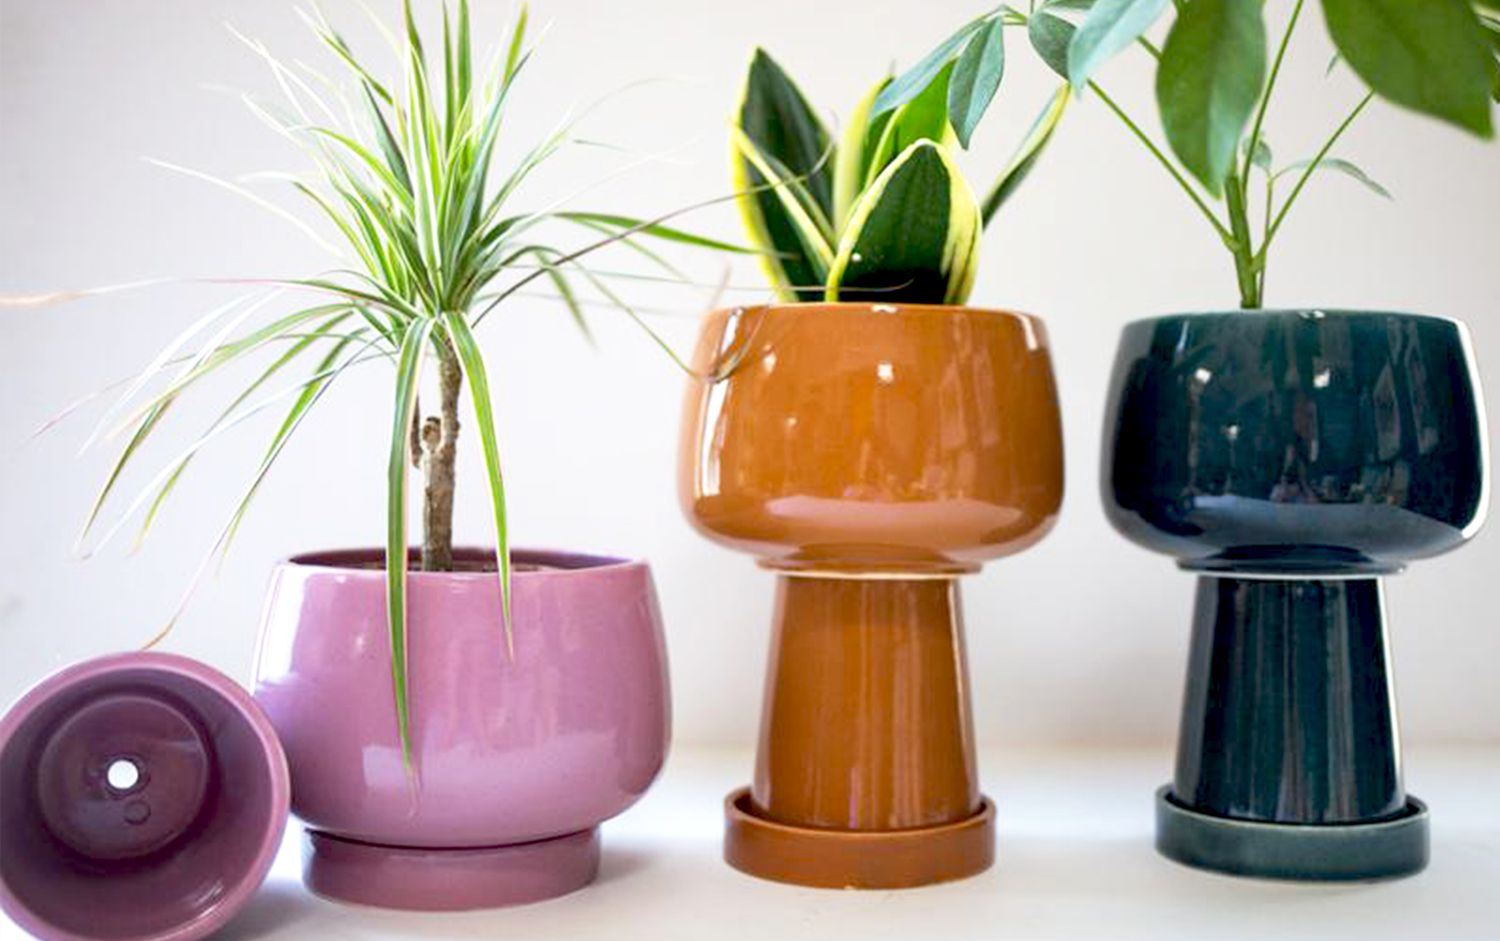 5 Decorative Planters for Indoor Gardens That Double As Art | Better